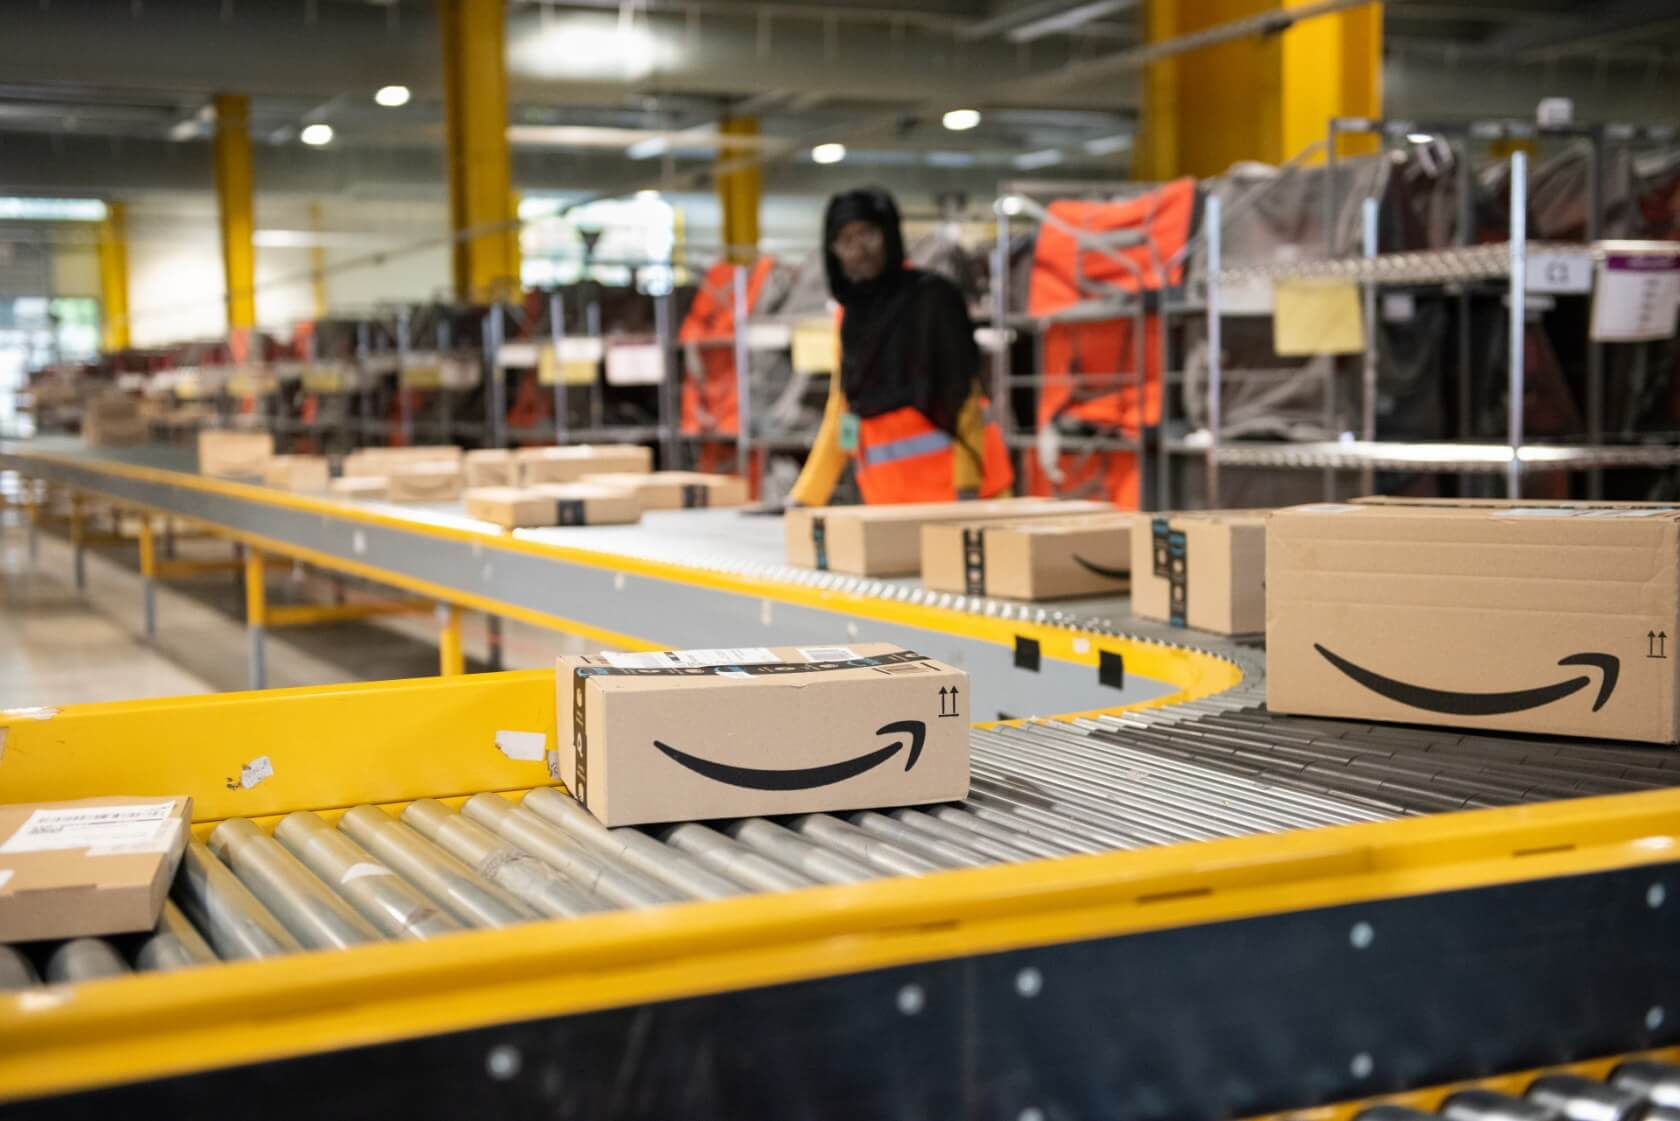 Amazon workers call for virtual 'Sick Out' to protest Coronavirus-related firings, work conditions